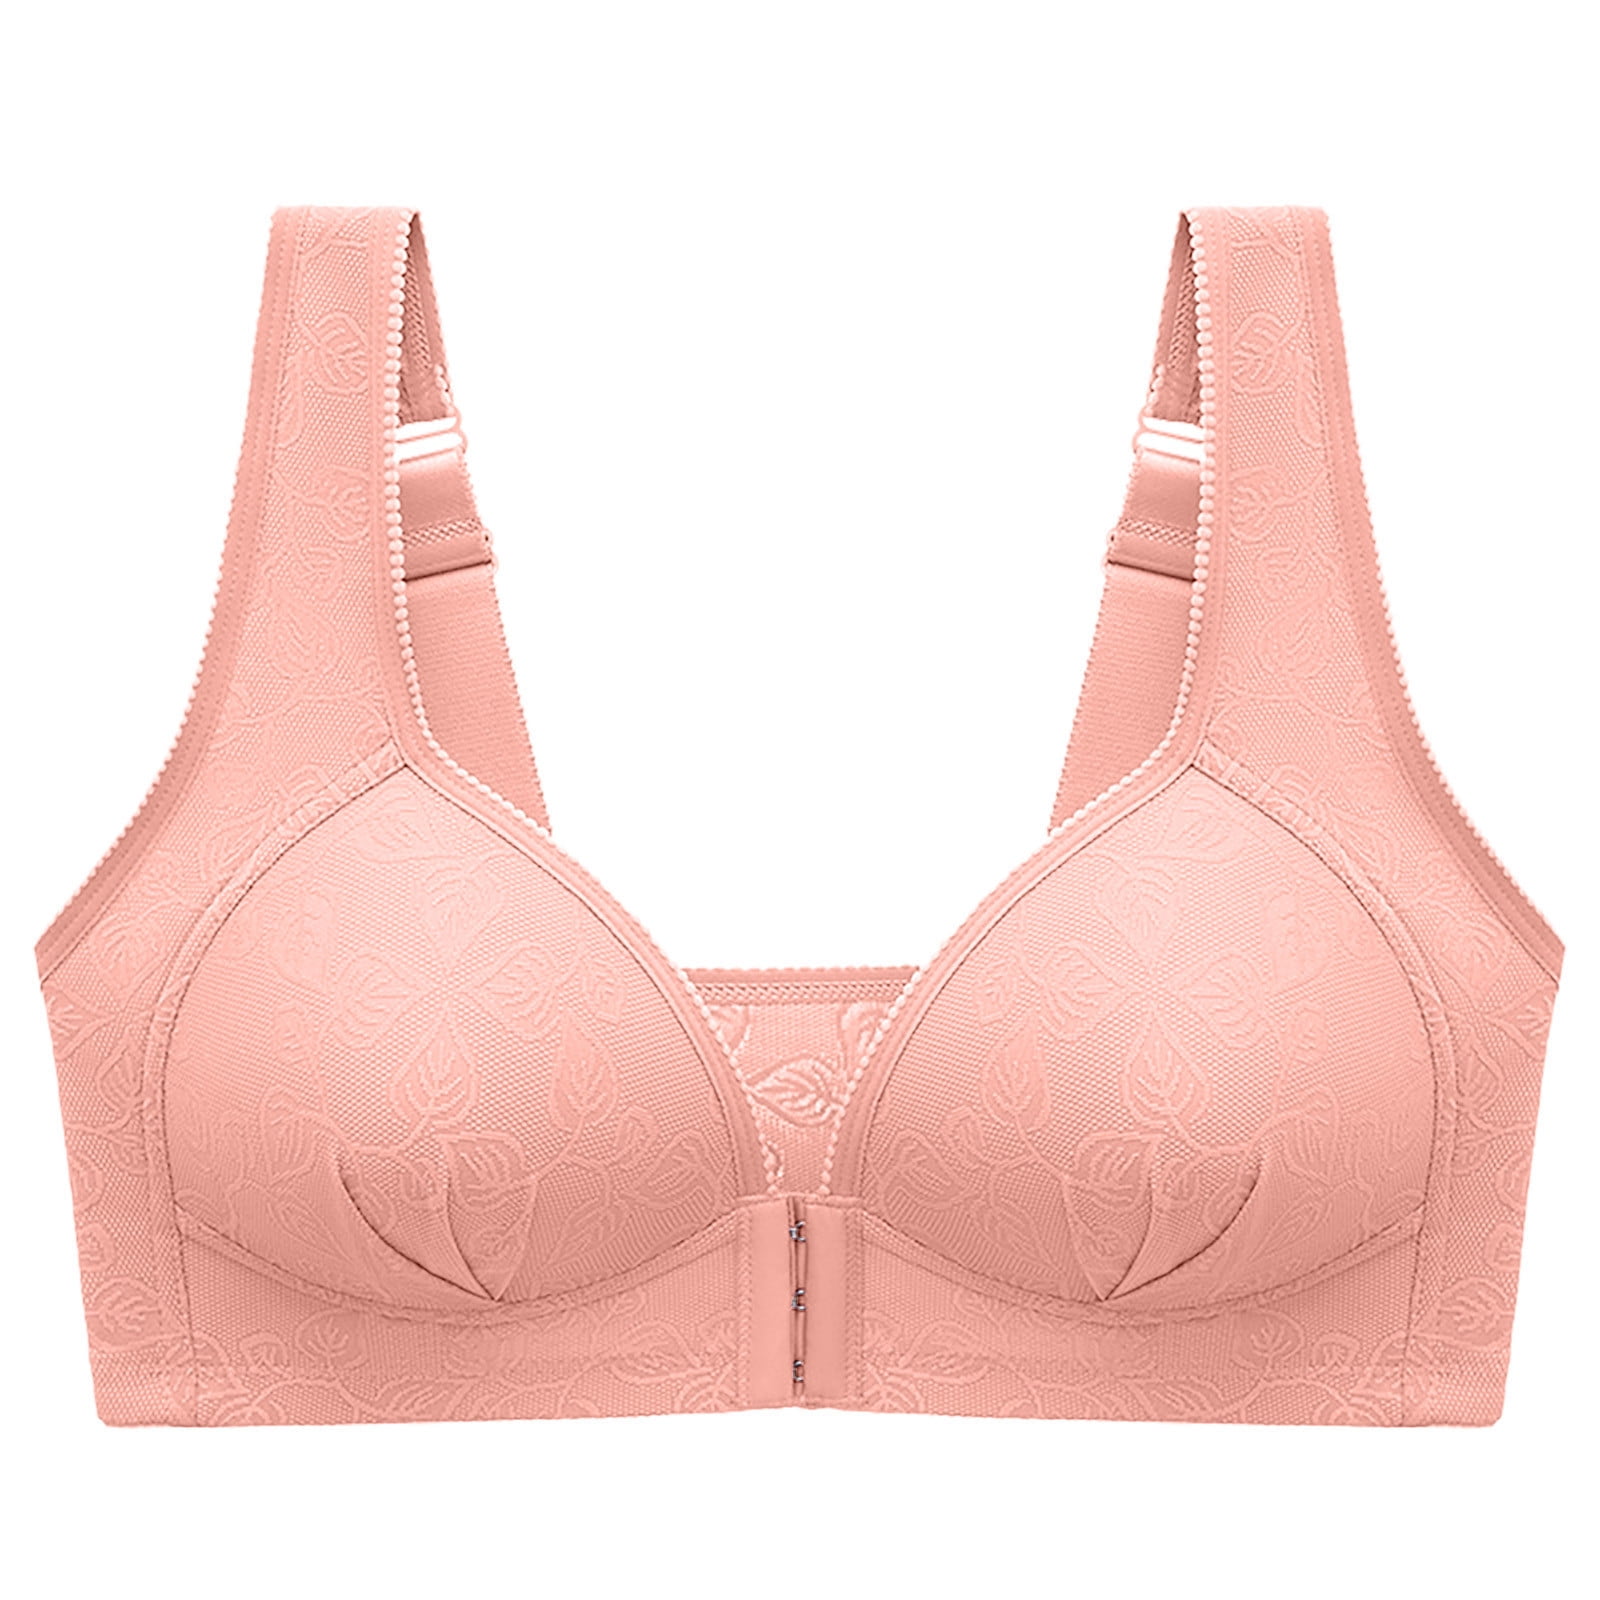 RYRJJ Clearance Front Closure Wire-Free Bras for Women Lace